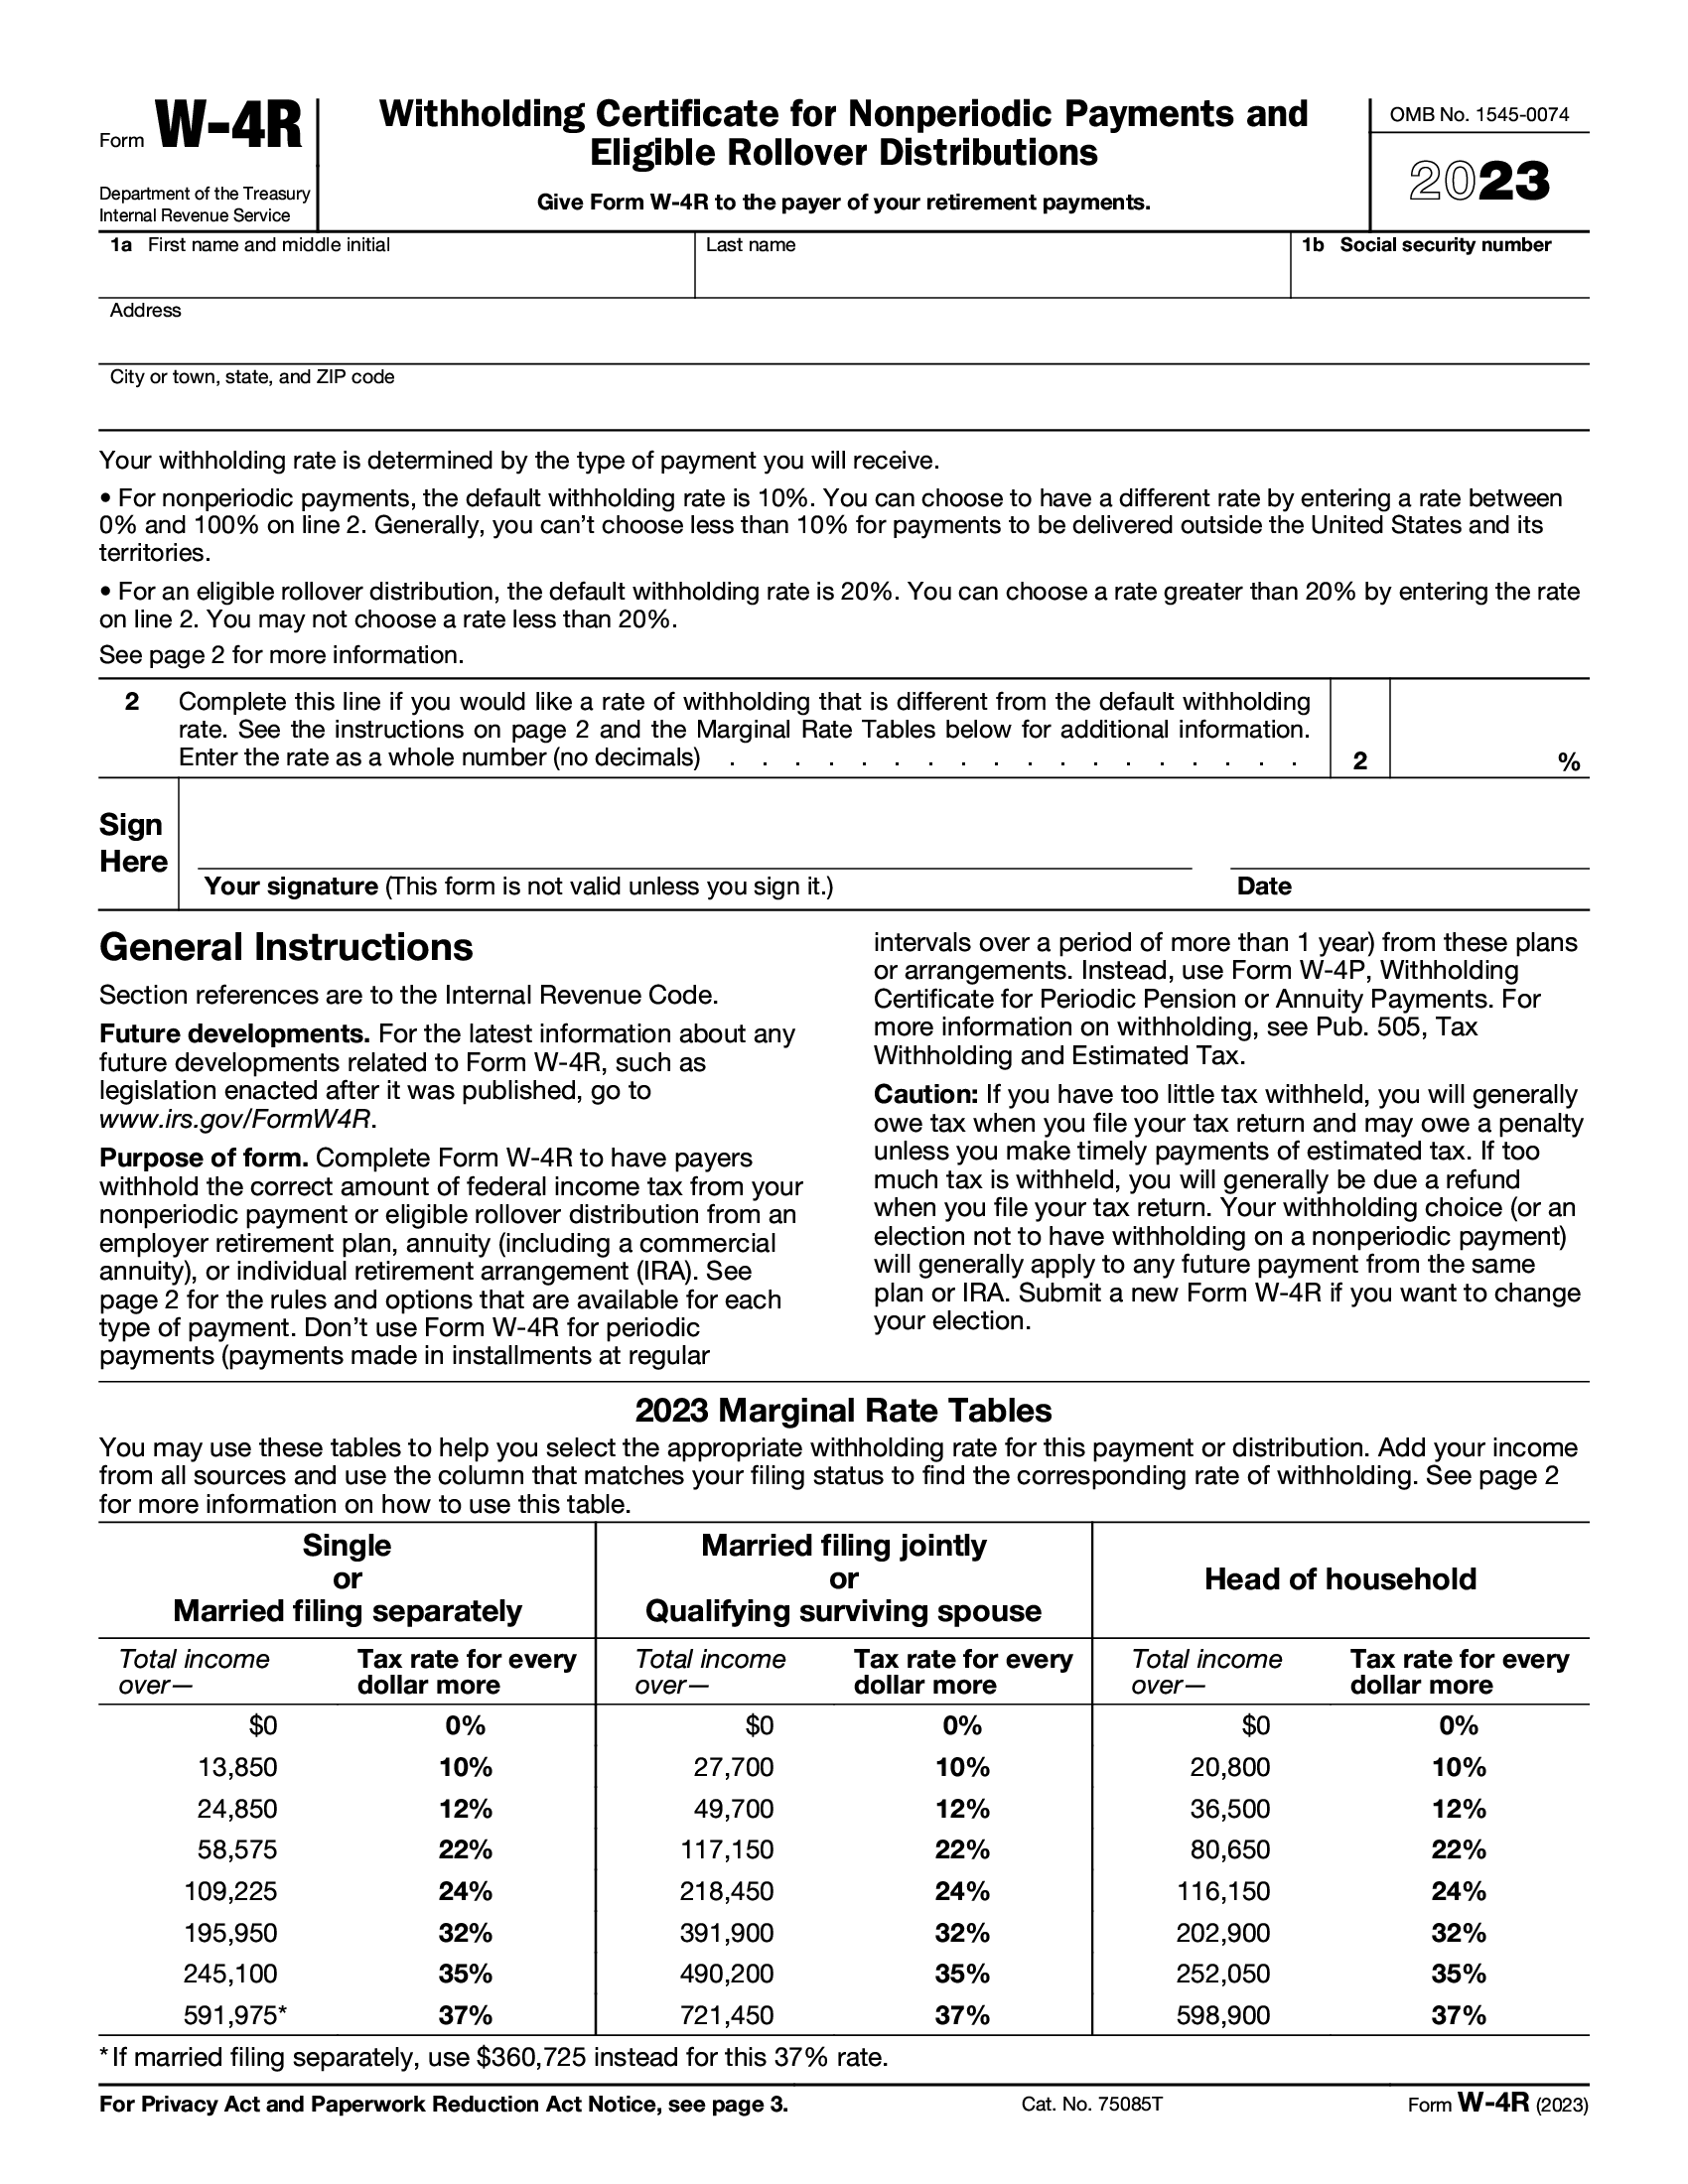 IRS Form W4R. Withholding Certificate for Nonperiodic Payments and